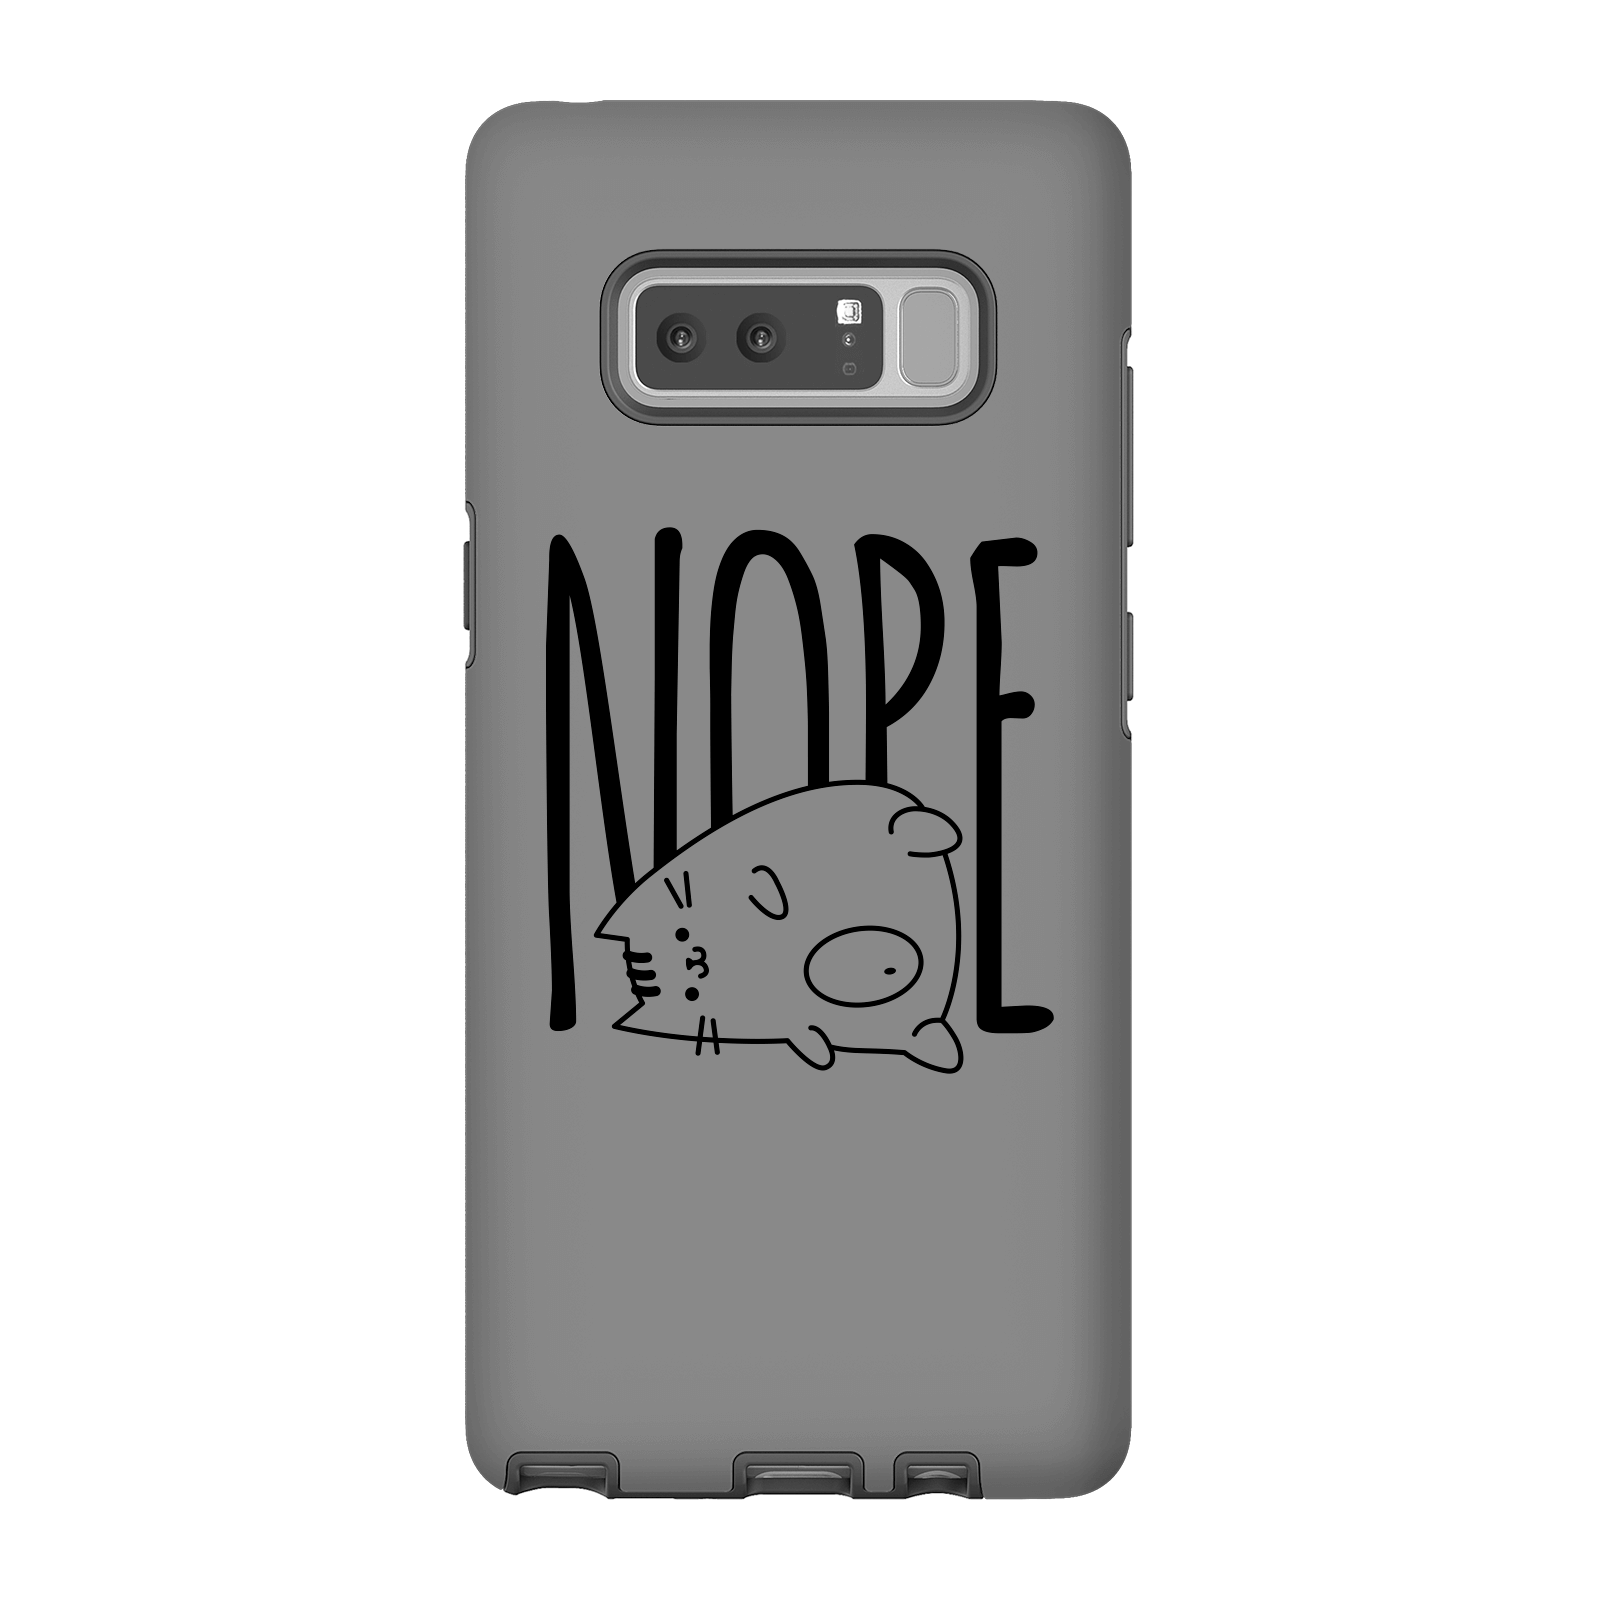 Nope Phone Case for iPhone and Android - Samsung Note 8 - Tough Case - Gloss